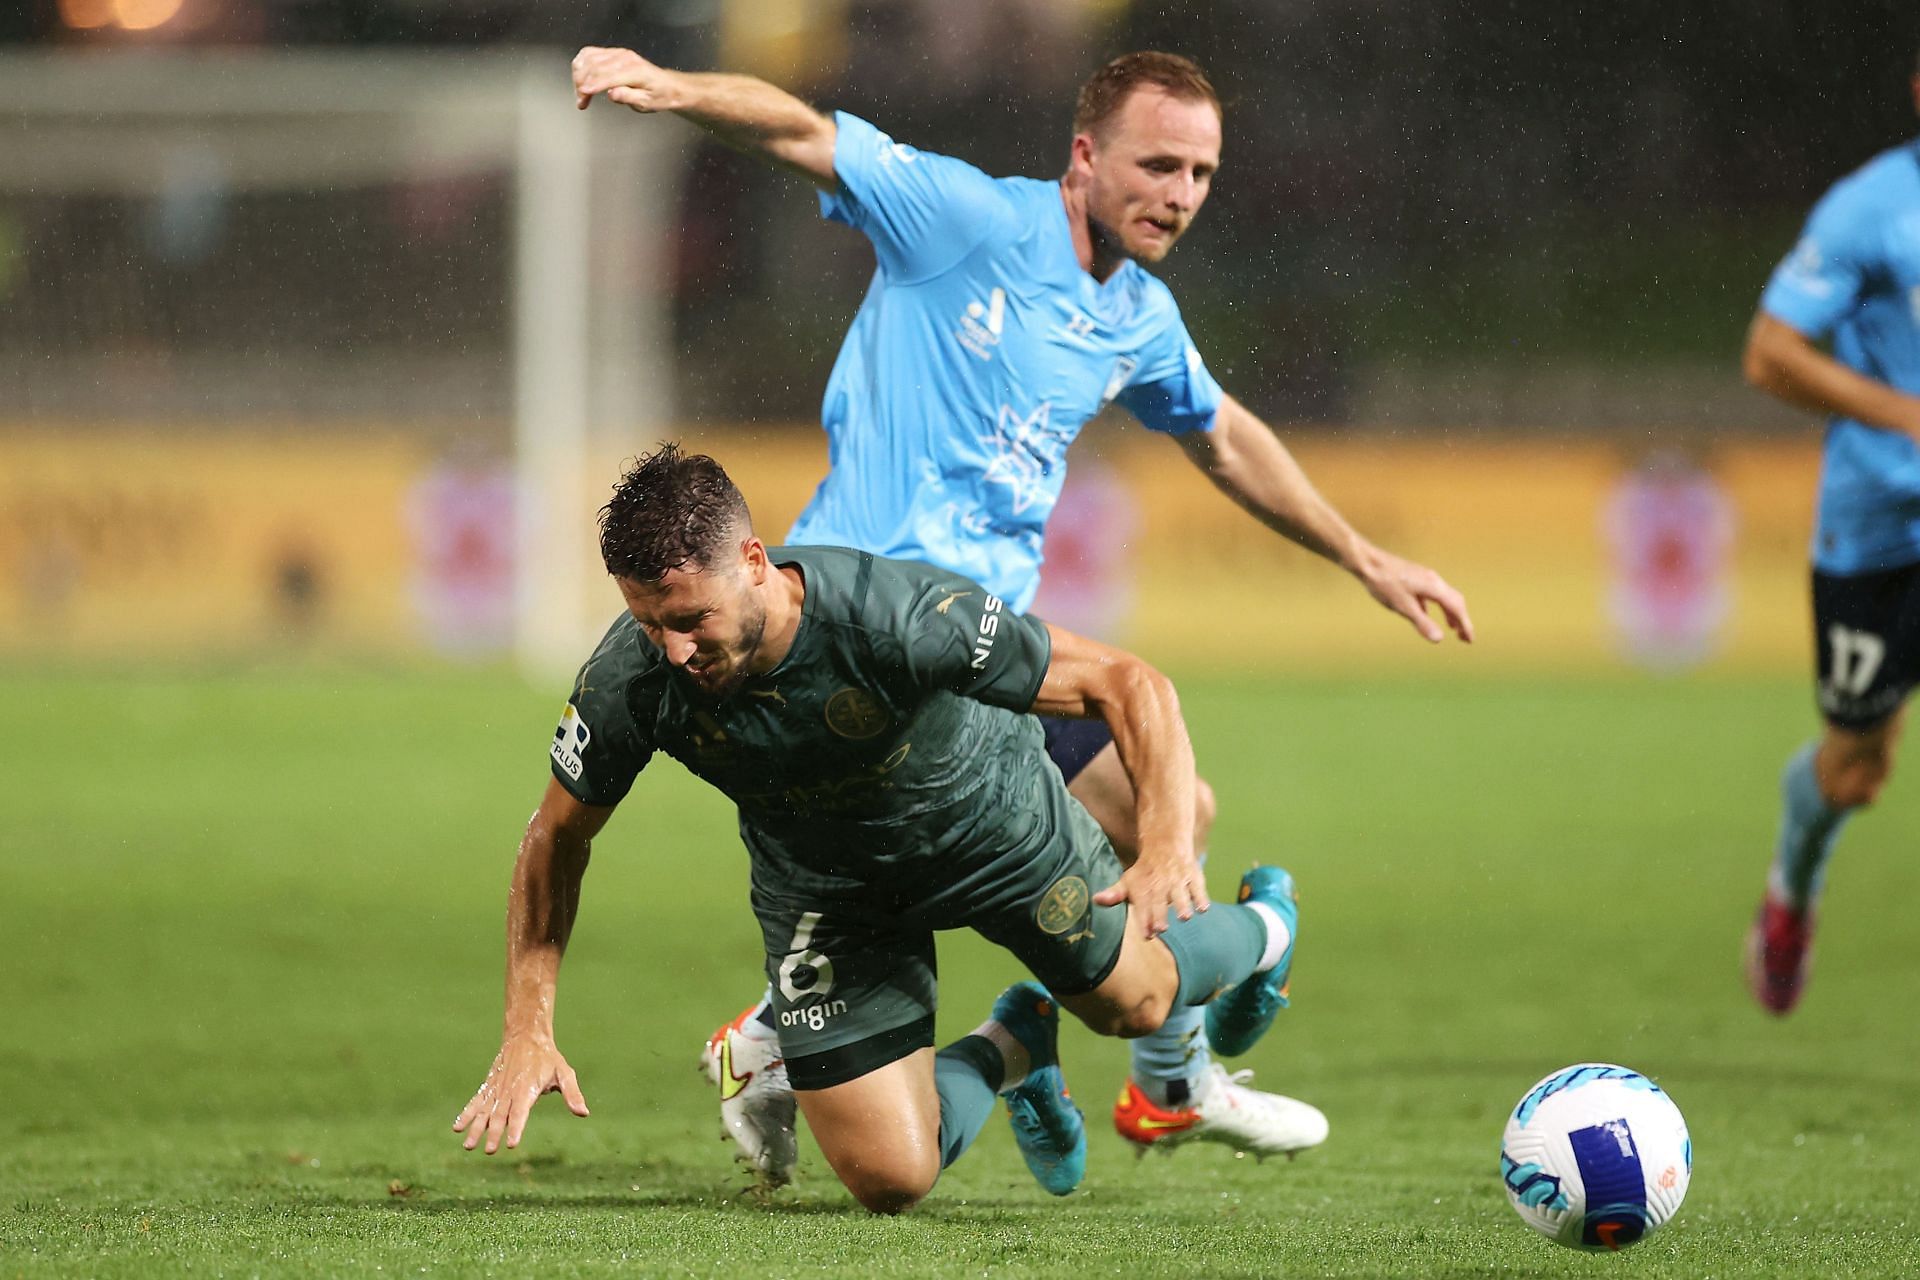 Melbourne City take on Sydney FC this week